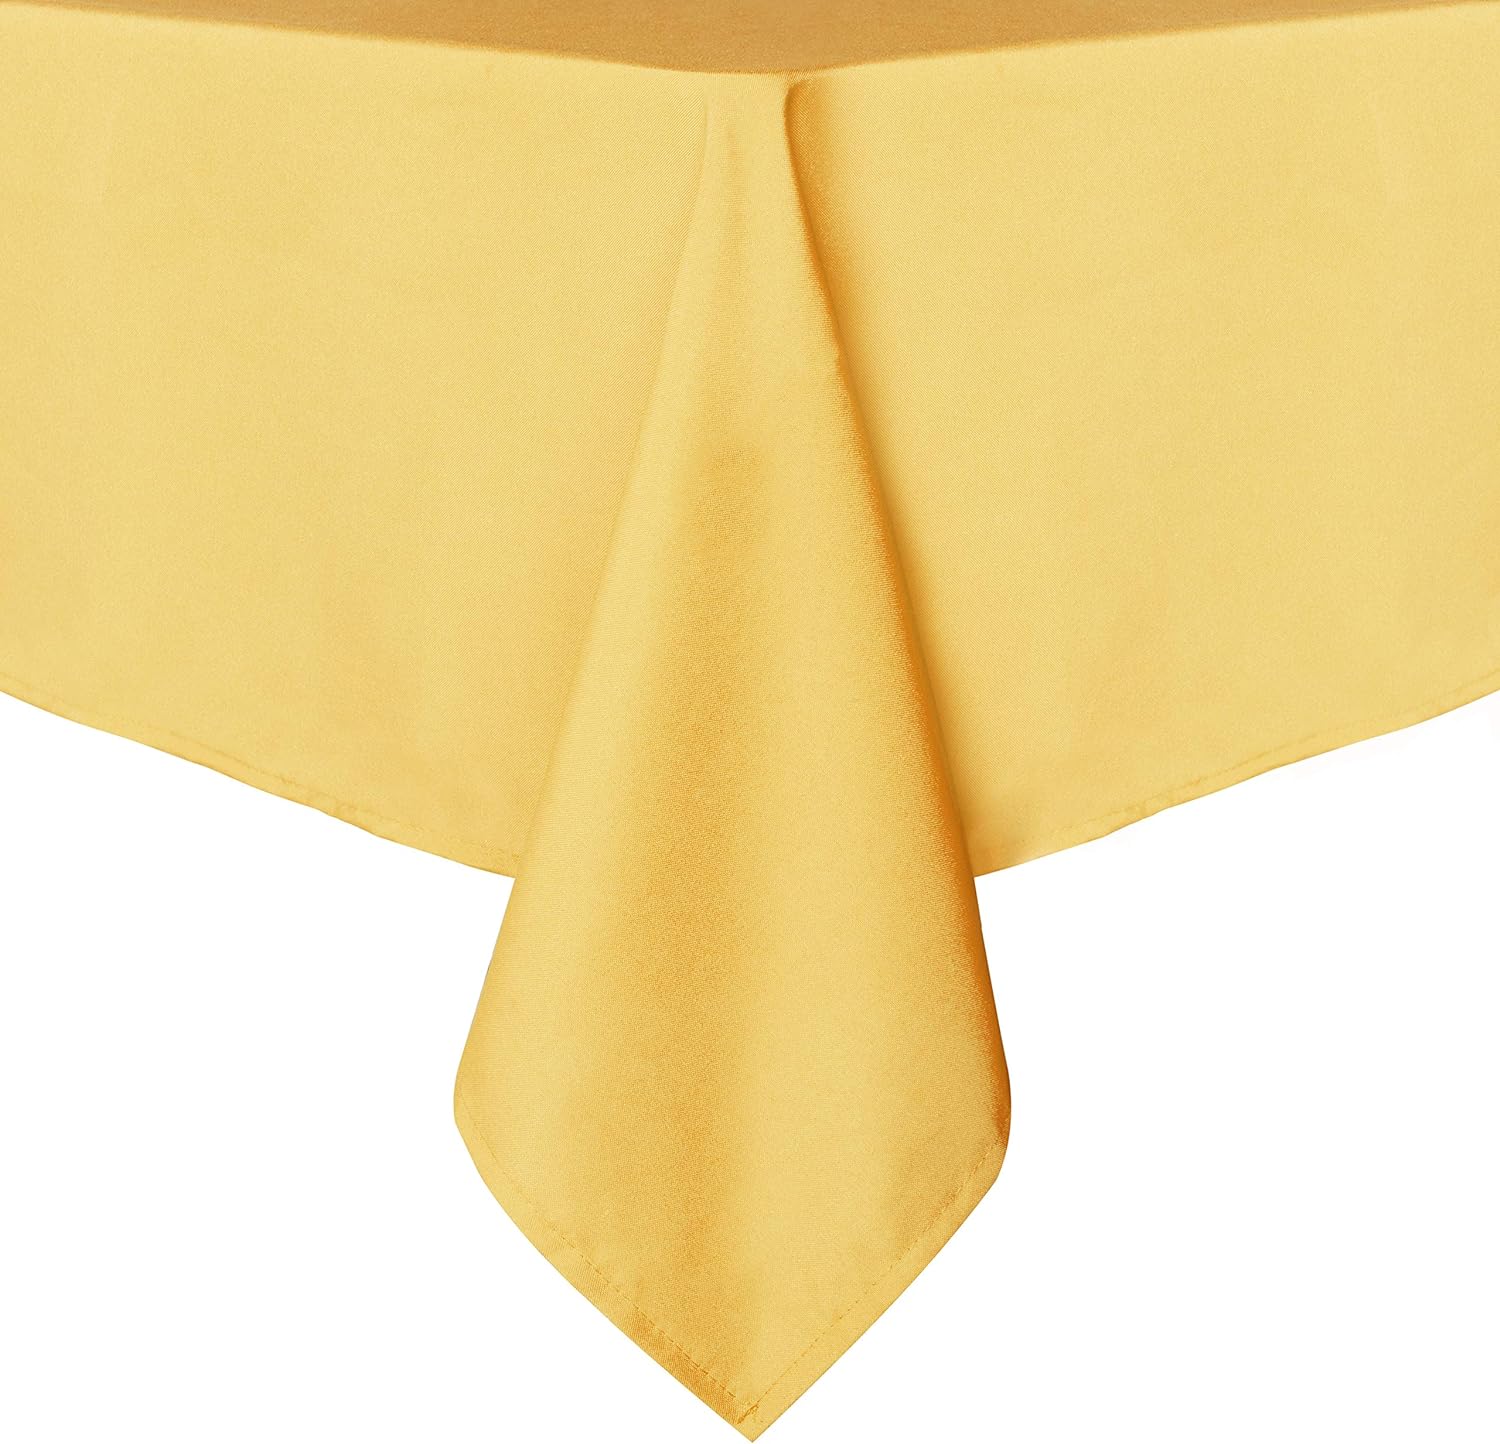 sancua Rectangle Tablecloth - 60 x 84 Inch - Stain and Wrinkle Resistant Washable Polyester Table Cloth, Decorative Fabric Table Cover for Dining Table, Buffet Parties and Camping, Yellow